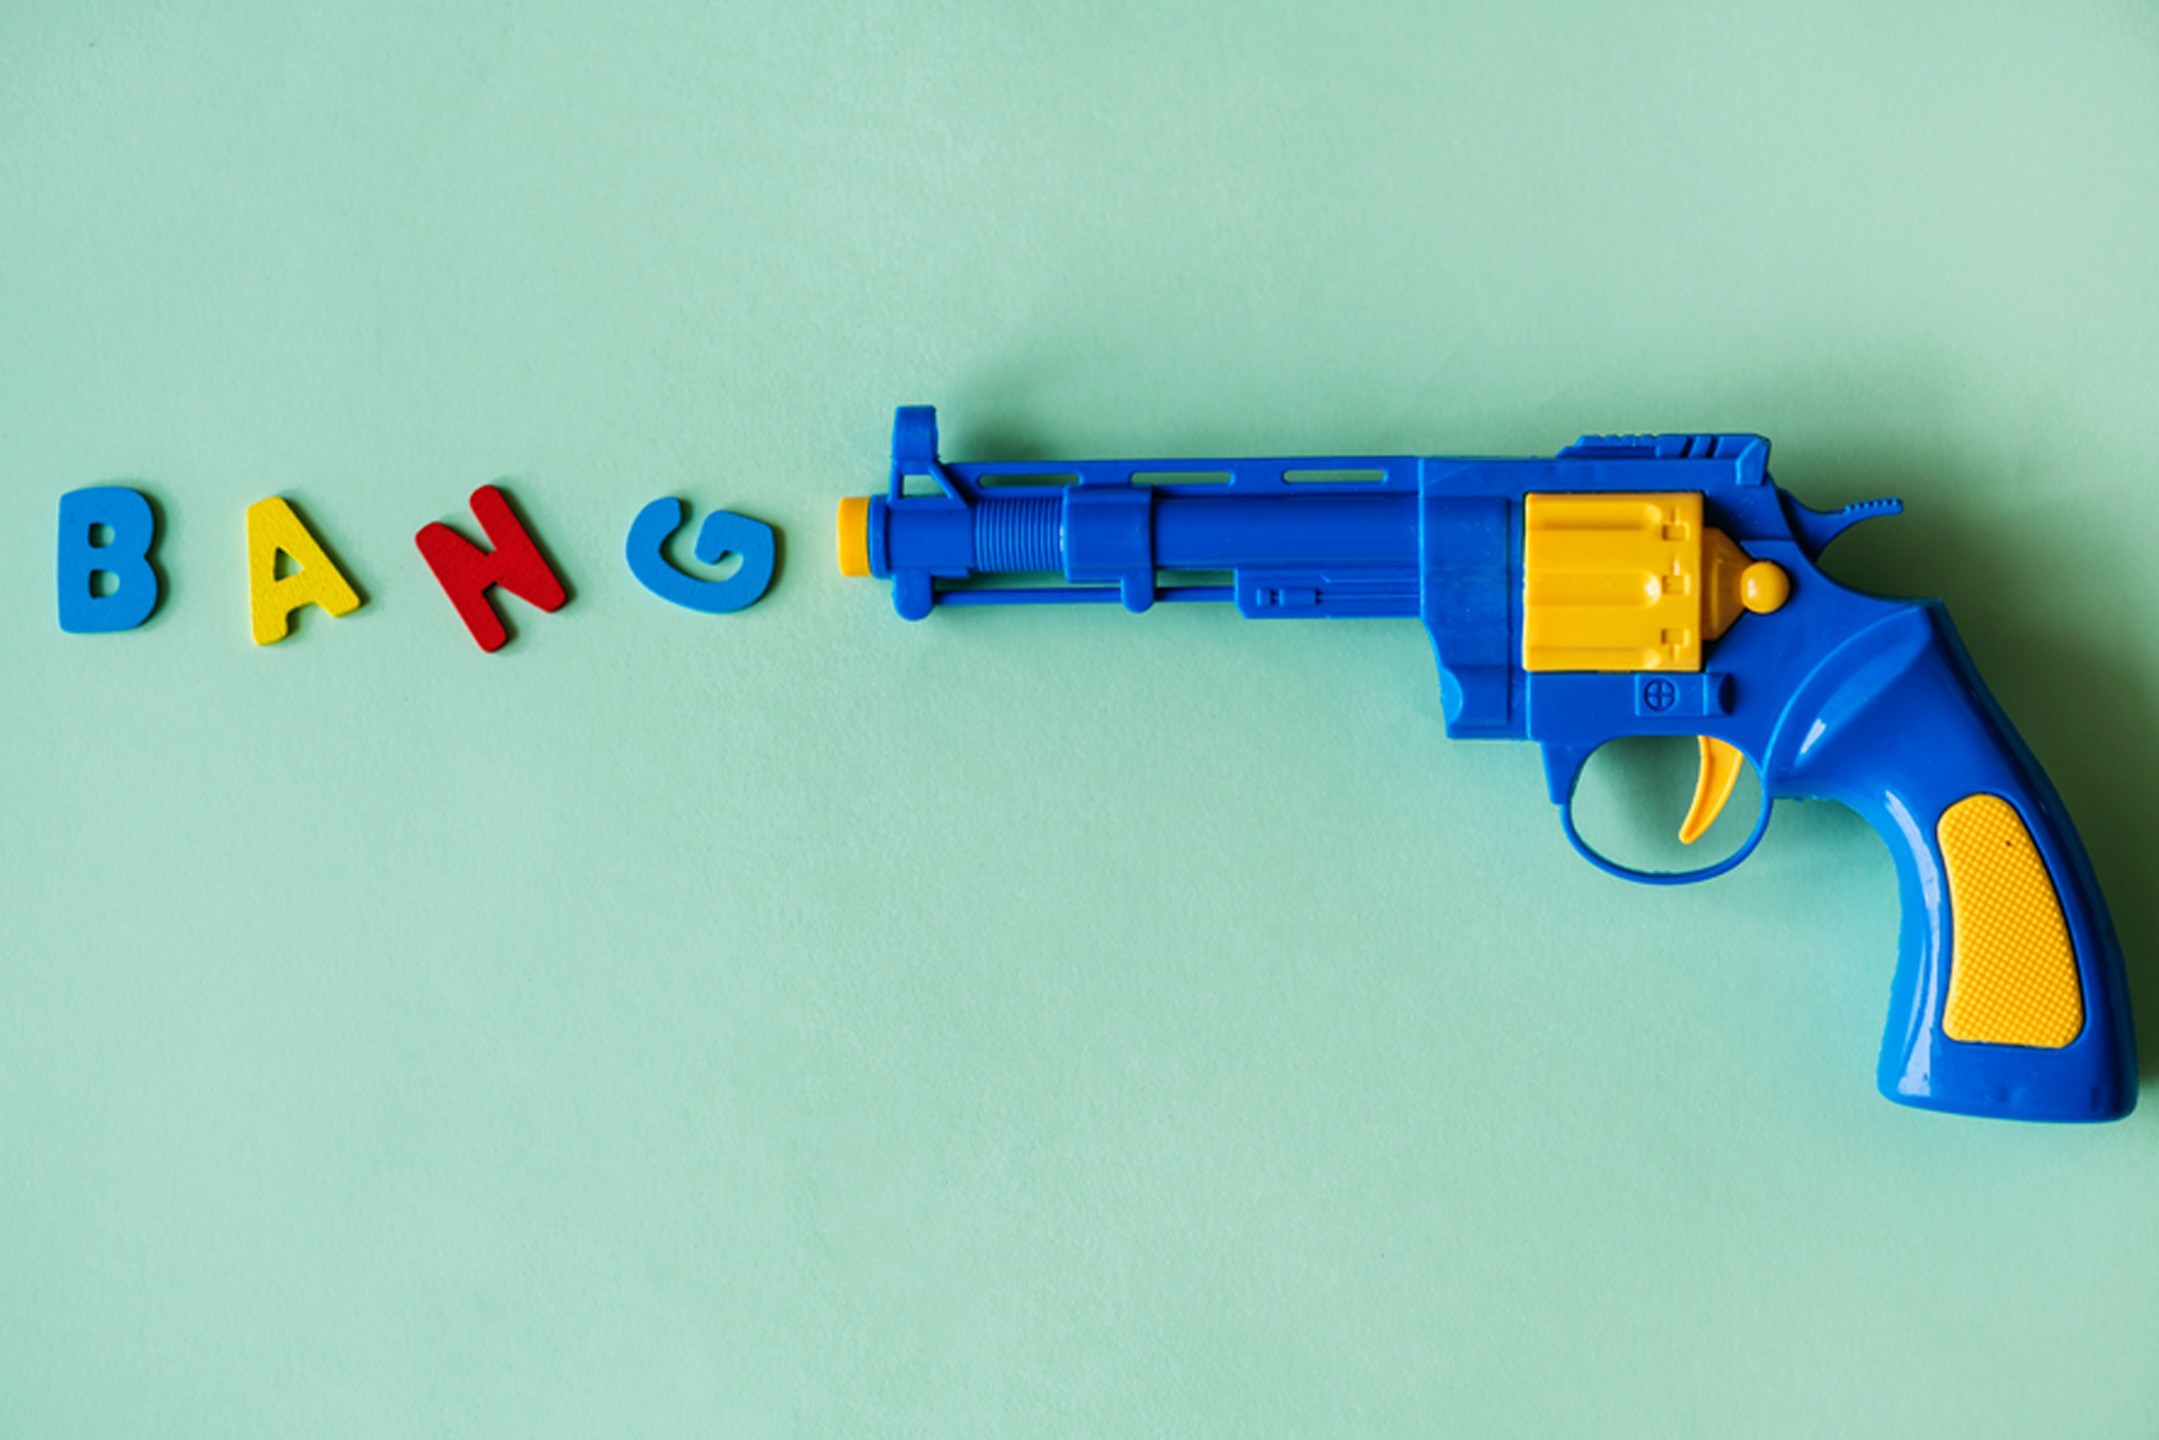 Keeping Kids From Toy Guns: How One Mother Changed Her Mind - The Atlantic